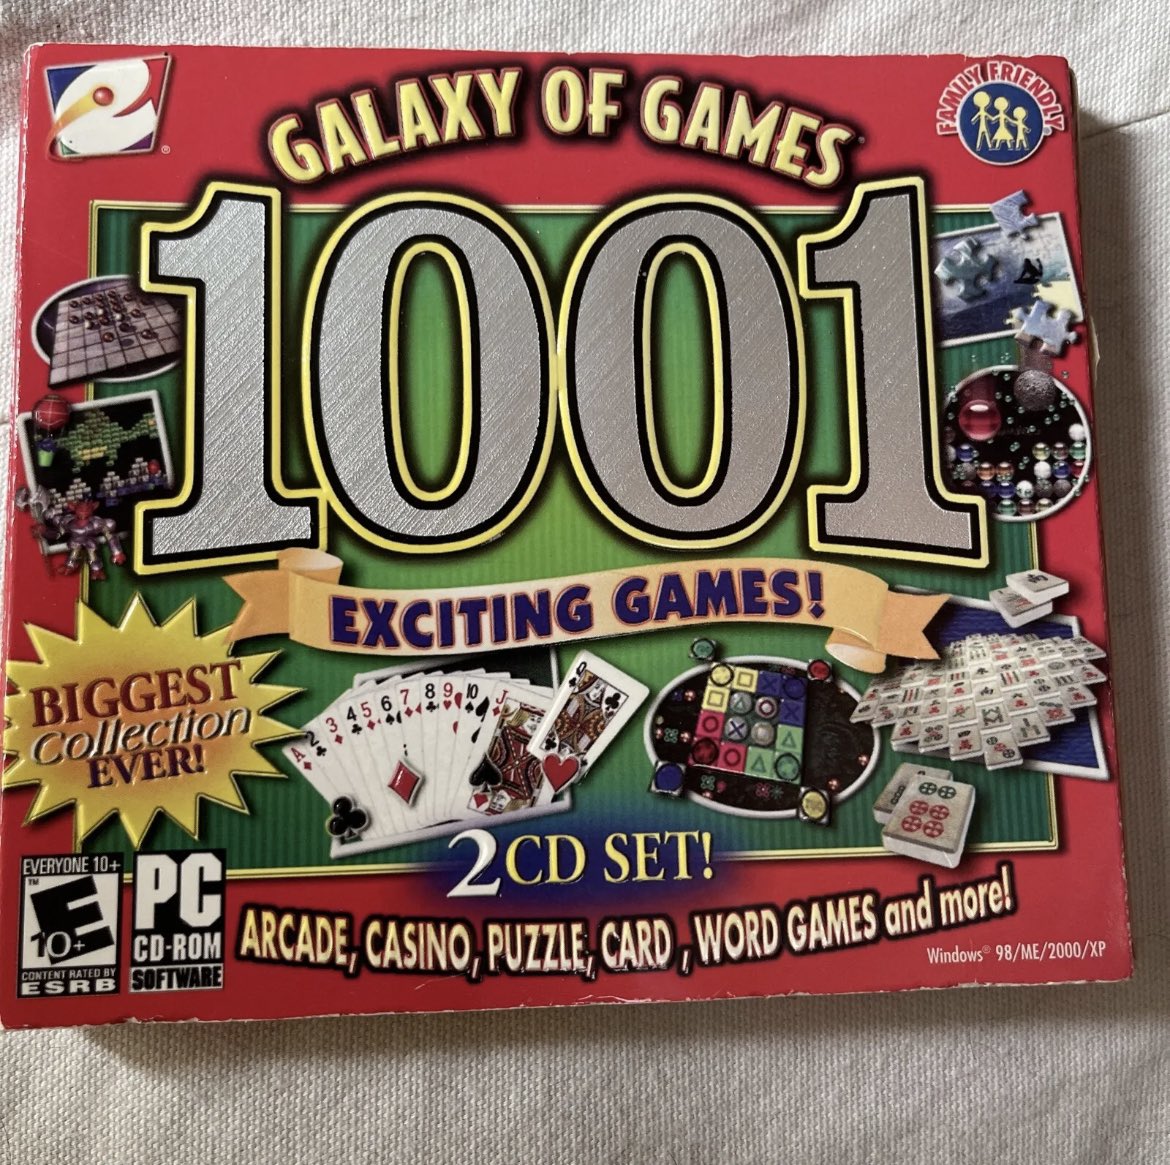 Kids these days will never know what it was like to buy this for $10 at the Staples checkout and take it home all excited only to eventually realize that NONE of the games were good